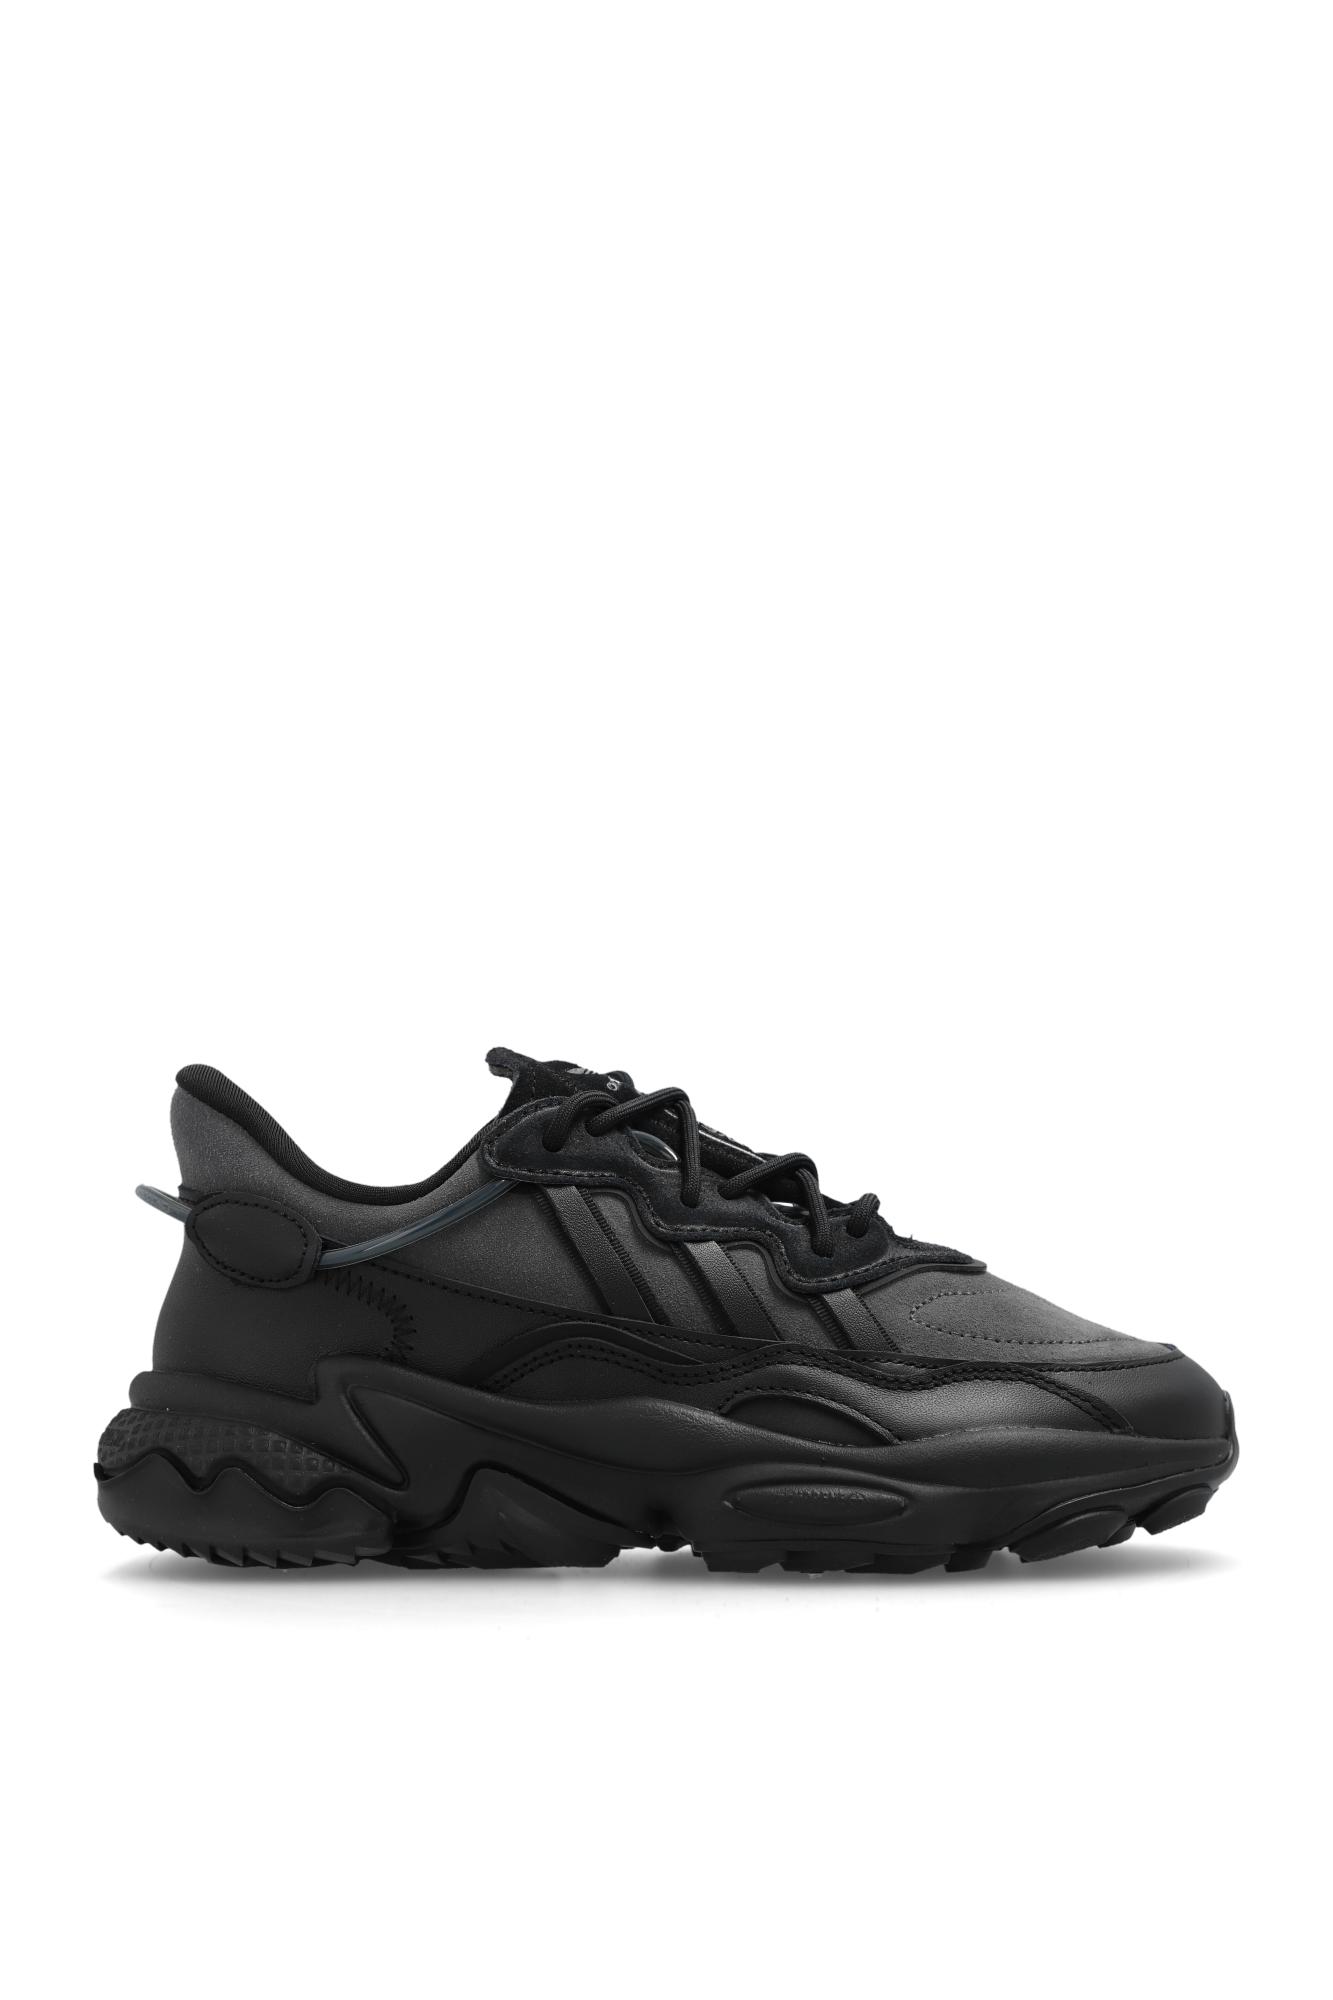 adidas Originals 'ozweego Tr' Sneakers in Black for Men | Lyst